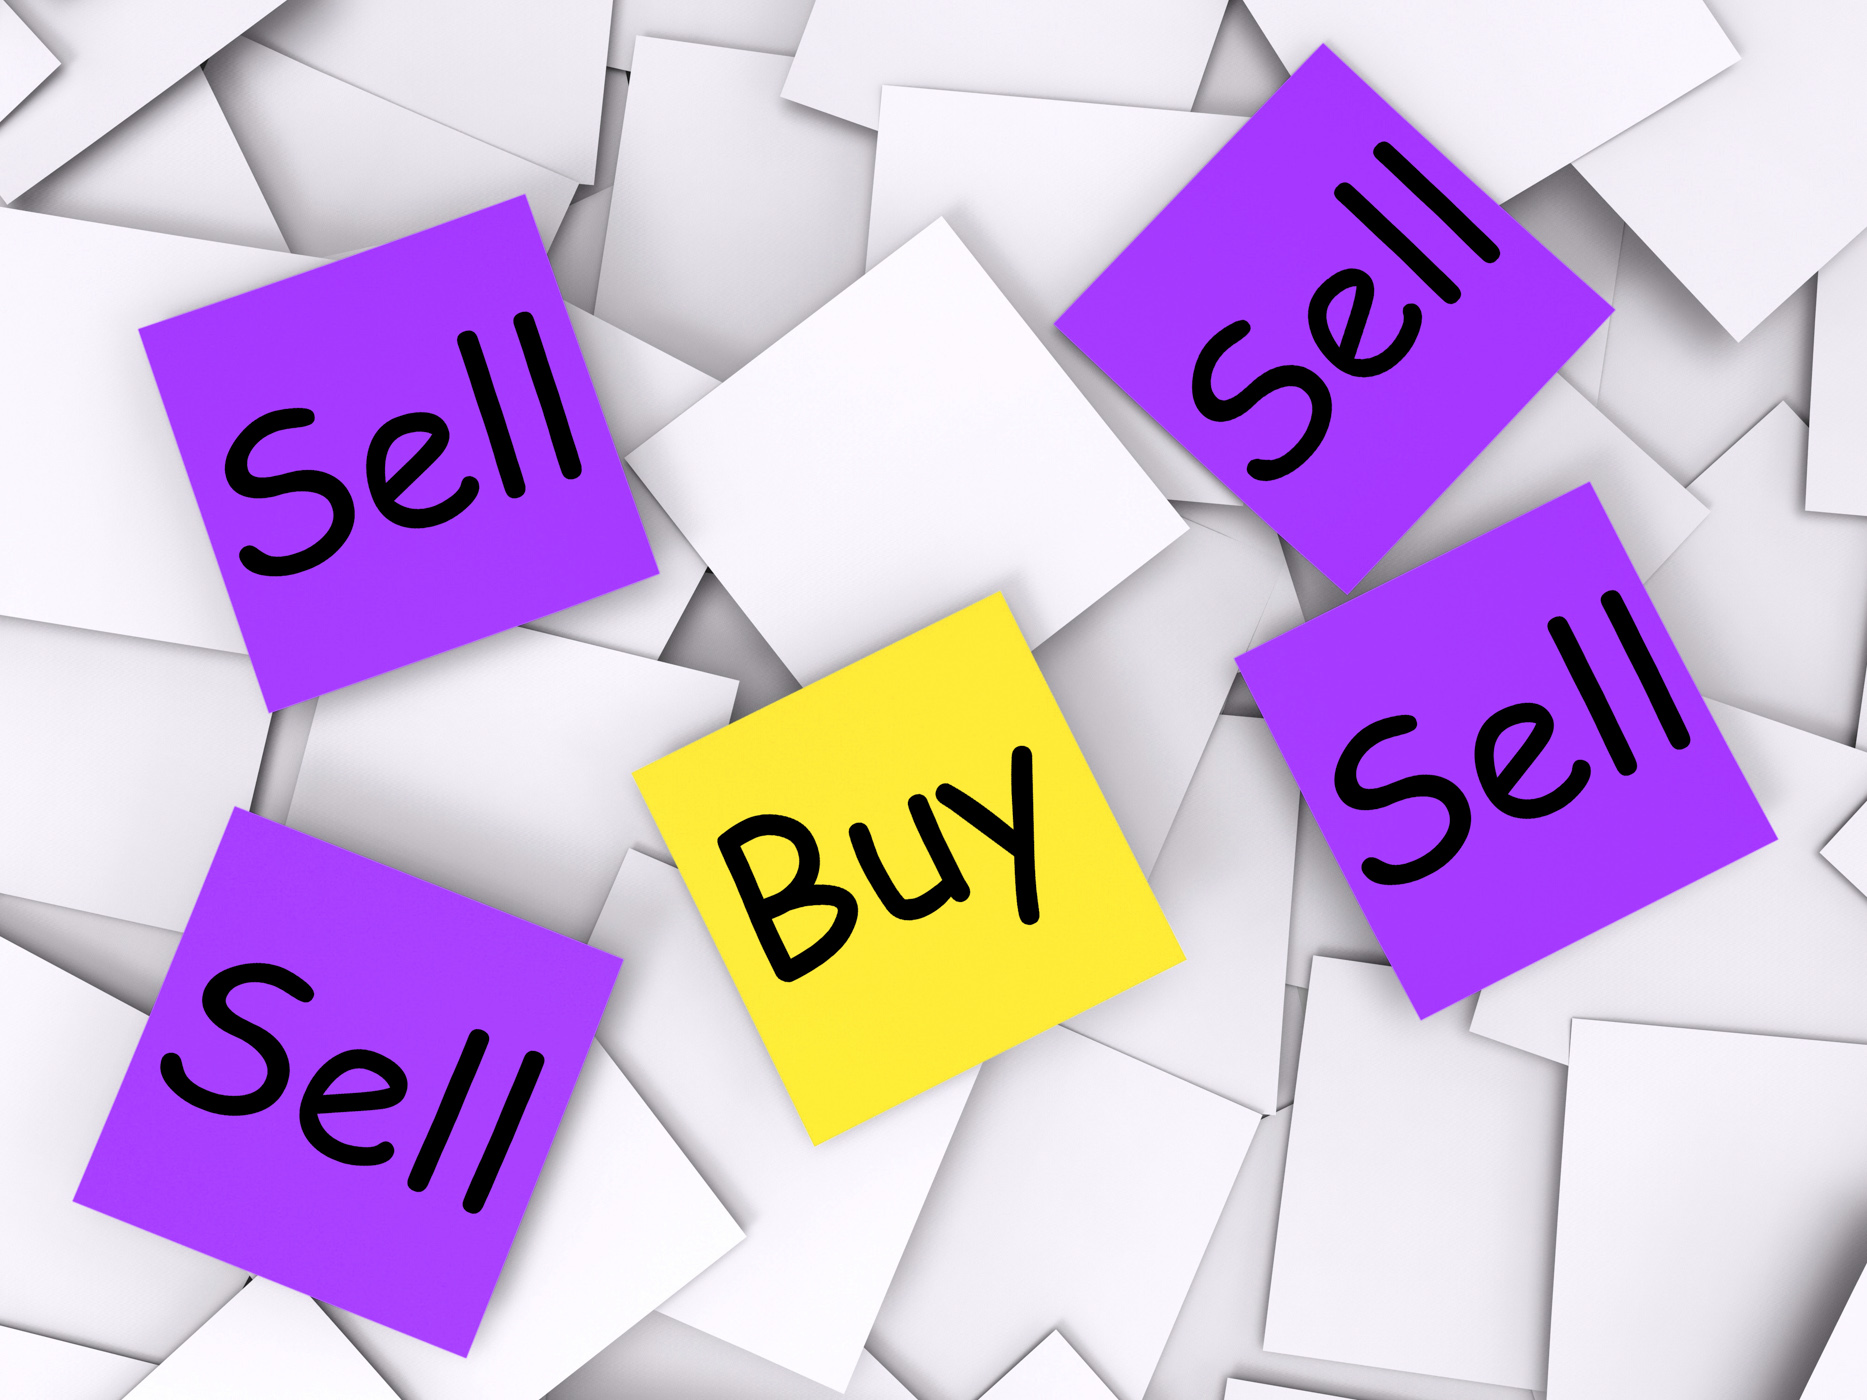 Buy Sell Post-It Notes Show Trade And Commerce, Bought, Retail, Trade, Sold, HQ Photo